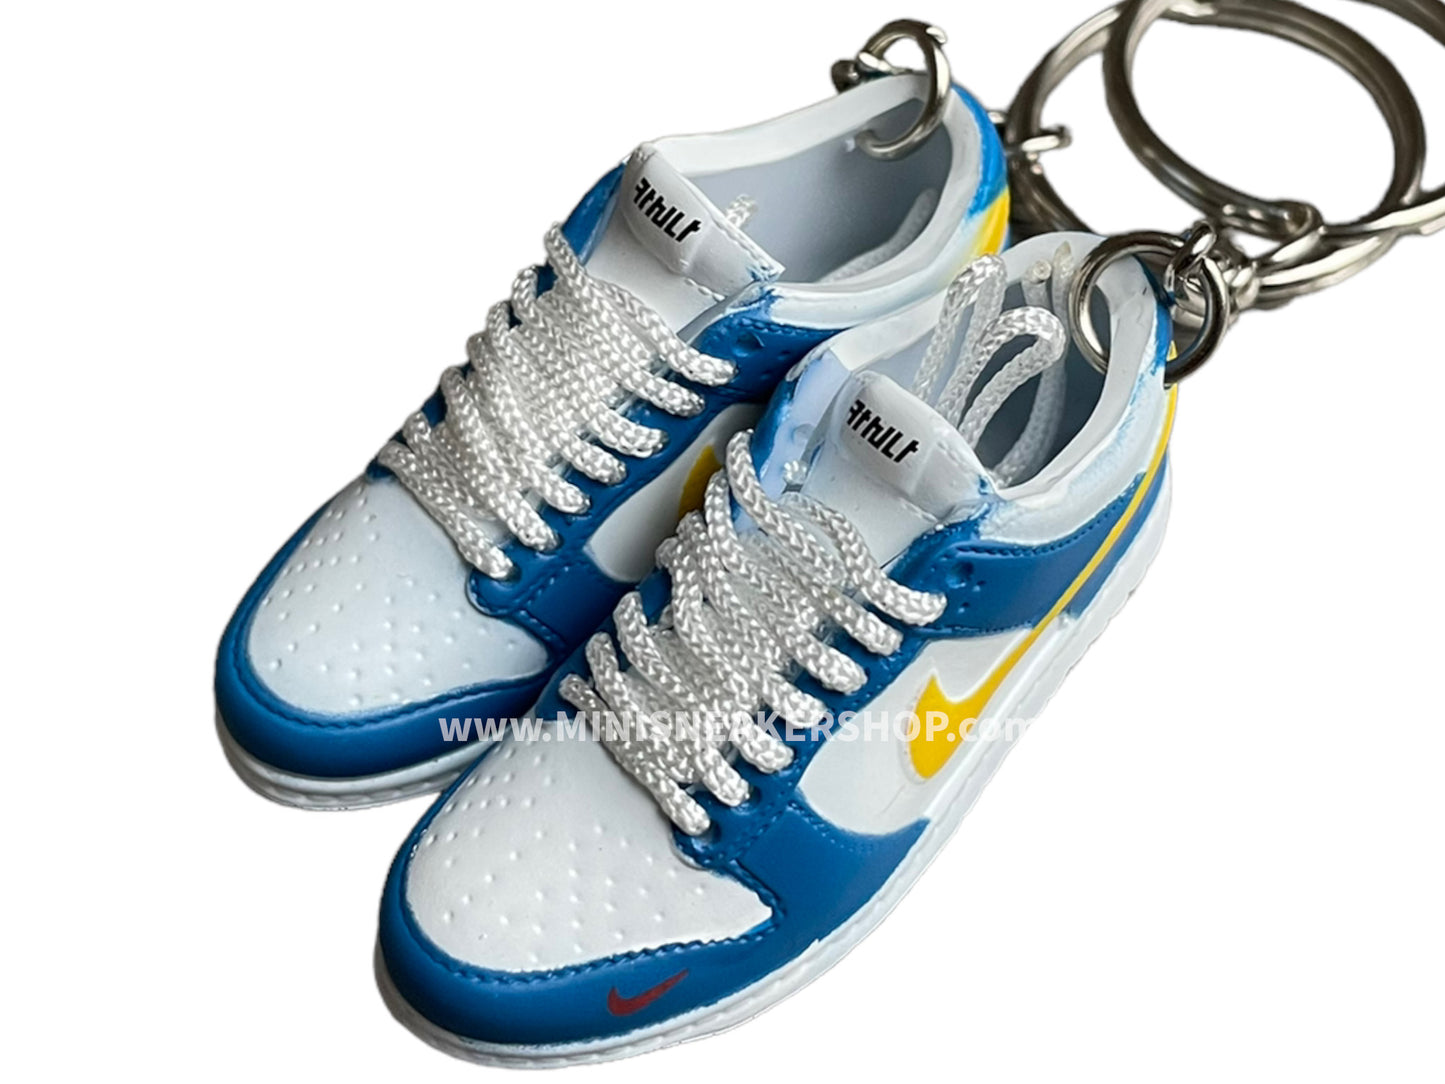 Mini sneaker keychain 3D Dunk - Blue and Yellow